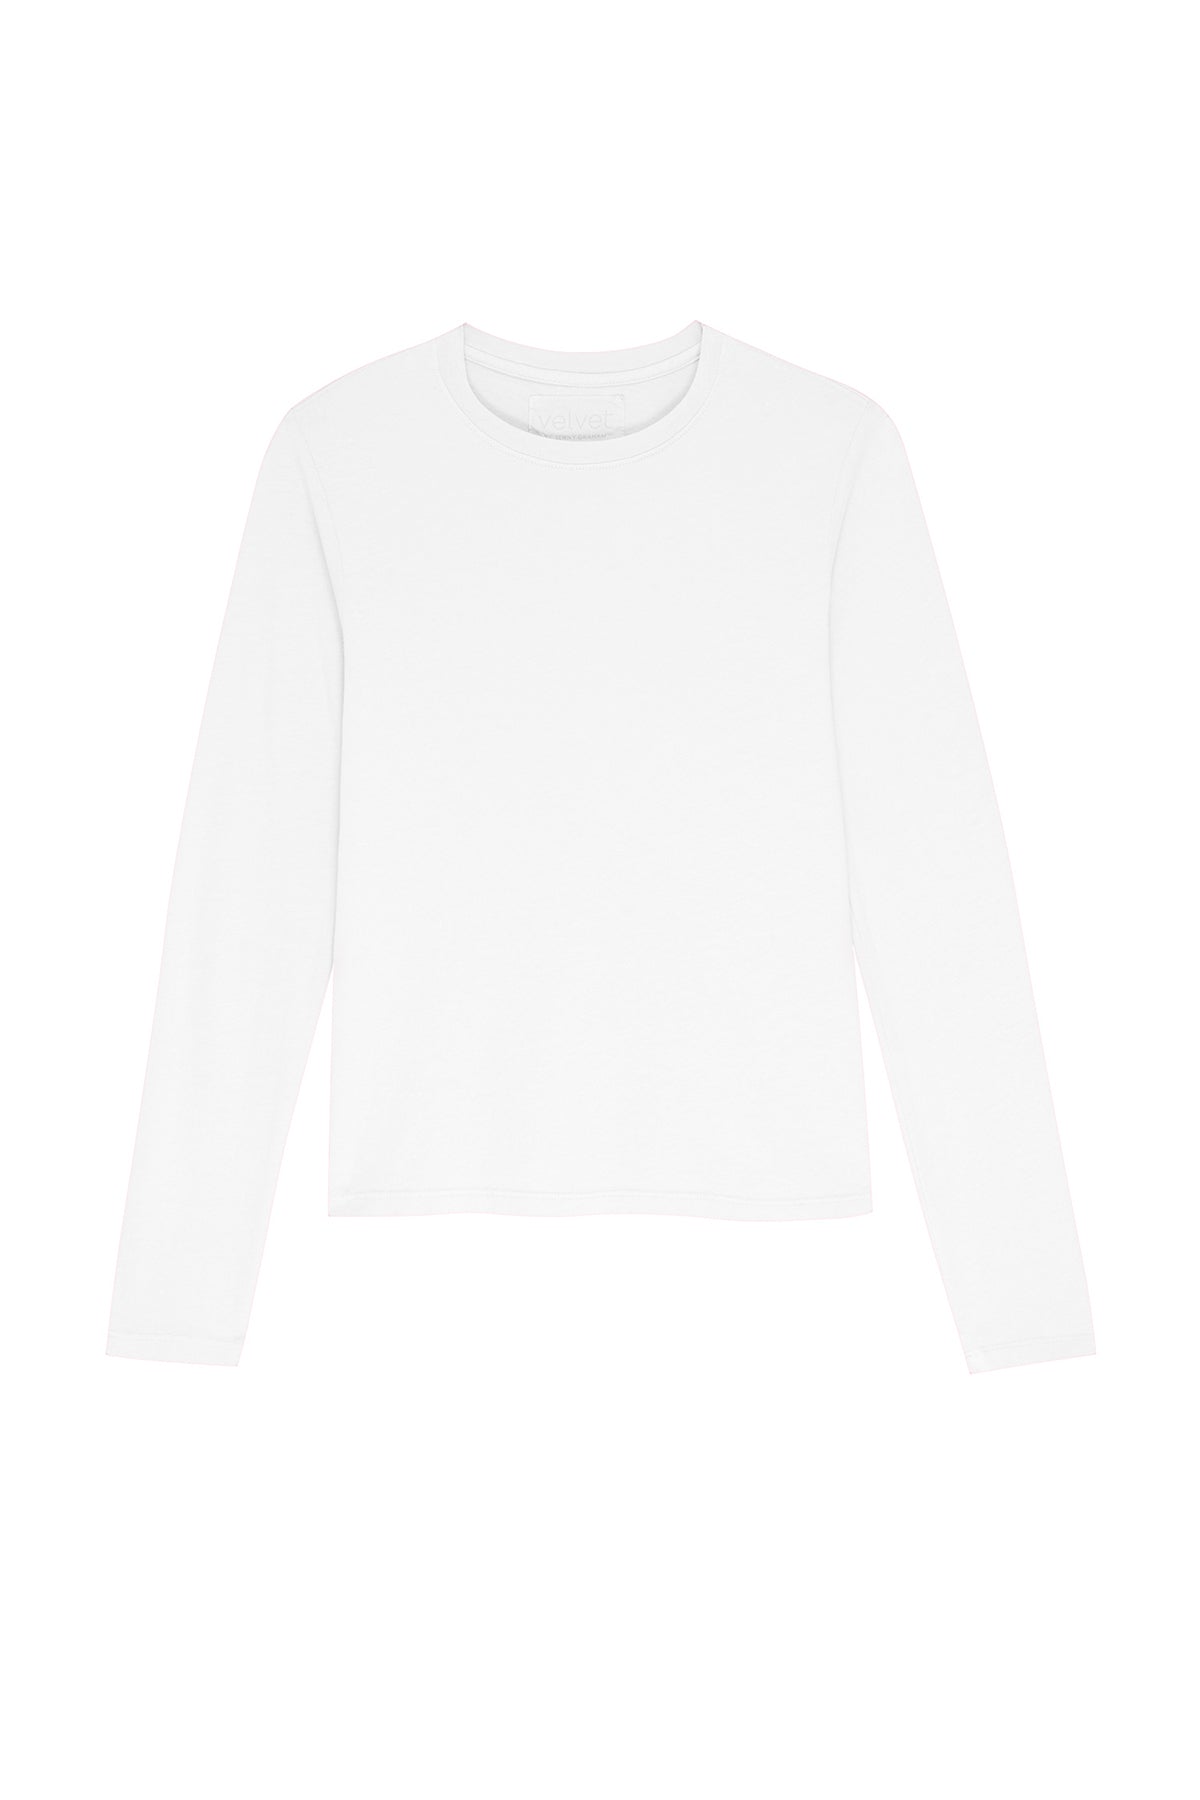 vicente tee white front flat-24351814516929